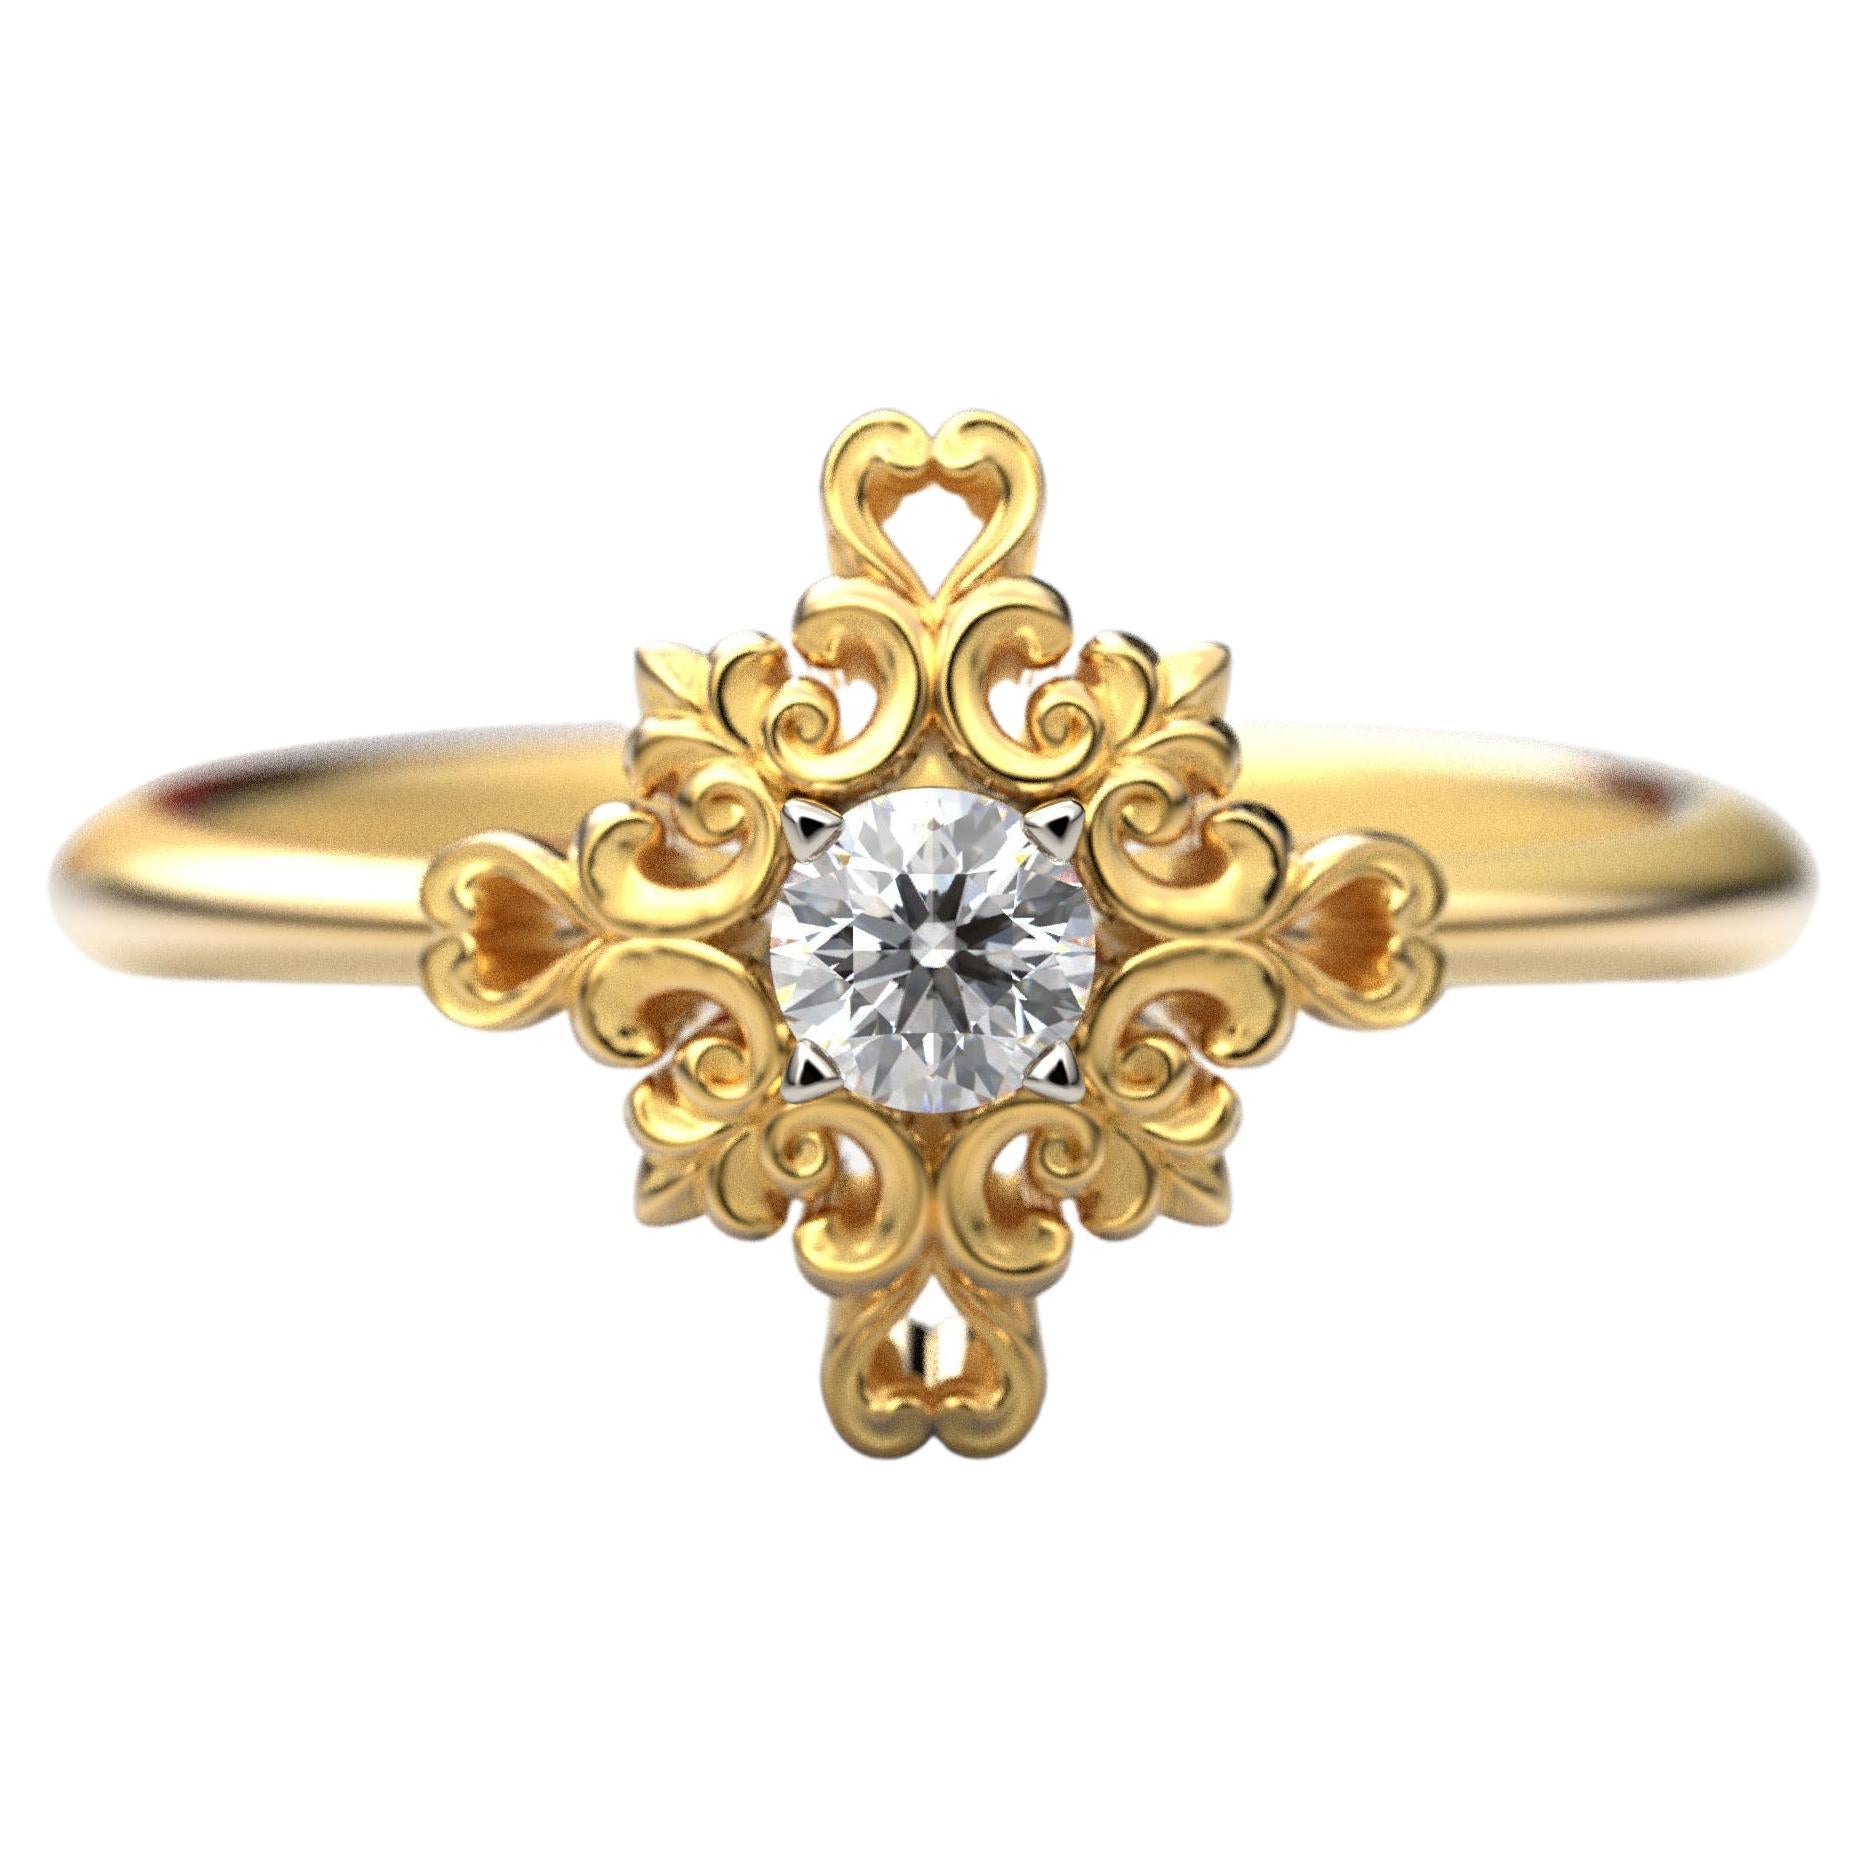 For Sale:  Italian Diamond Engagement Ring with Baroque Setting 18k gold